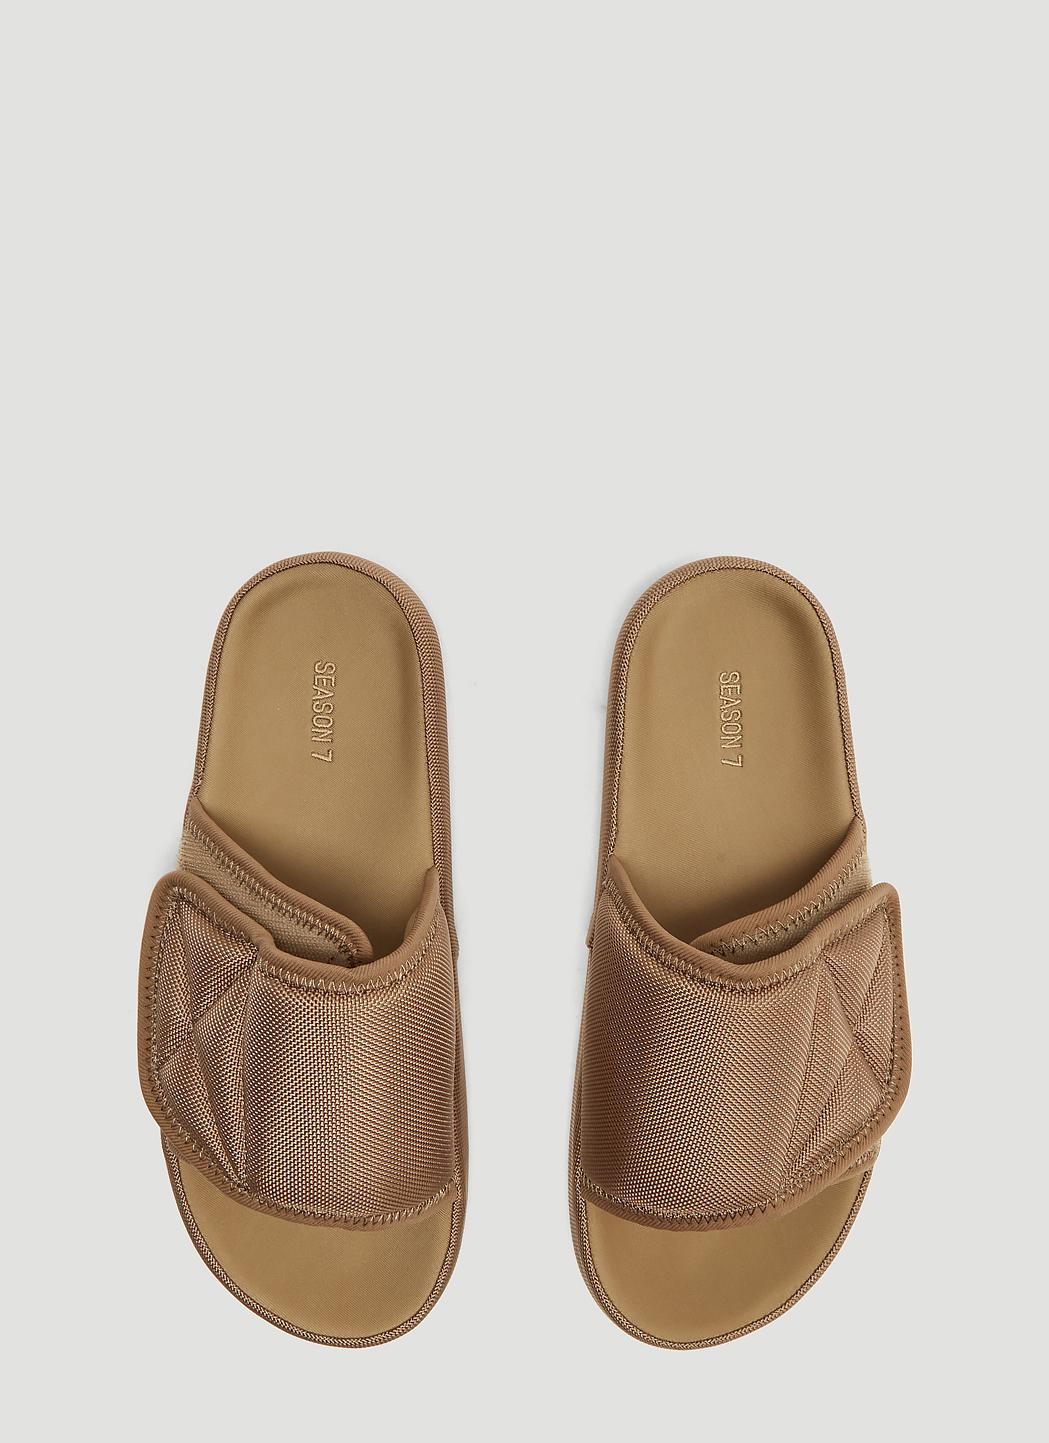 Yeezy Synthetic Nylon Slipper Sandals  In Beige in Natural 